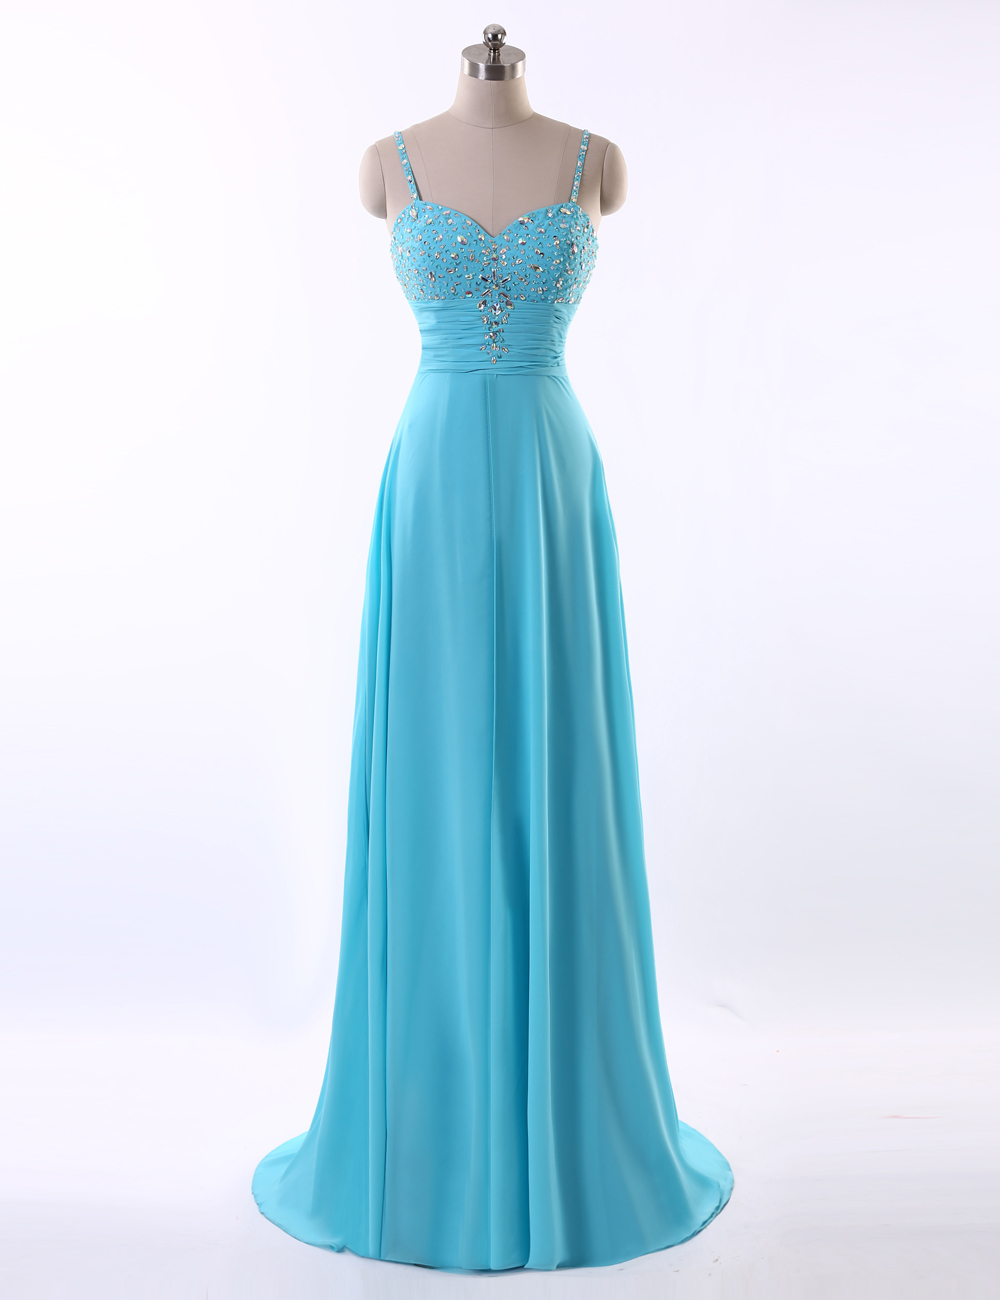 Blue Long Evening Dress Sexy Beaded A-line Colorful Chiffon Evening Gowns Arrival Women Formal Dresses